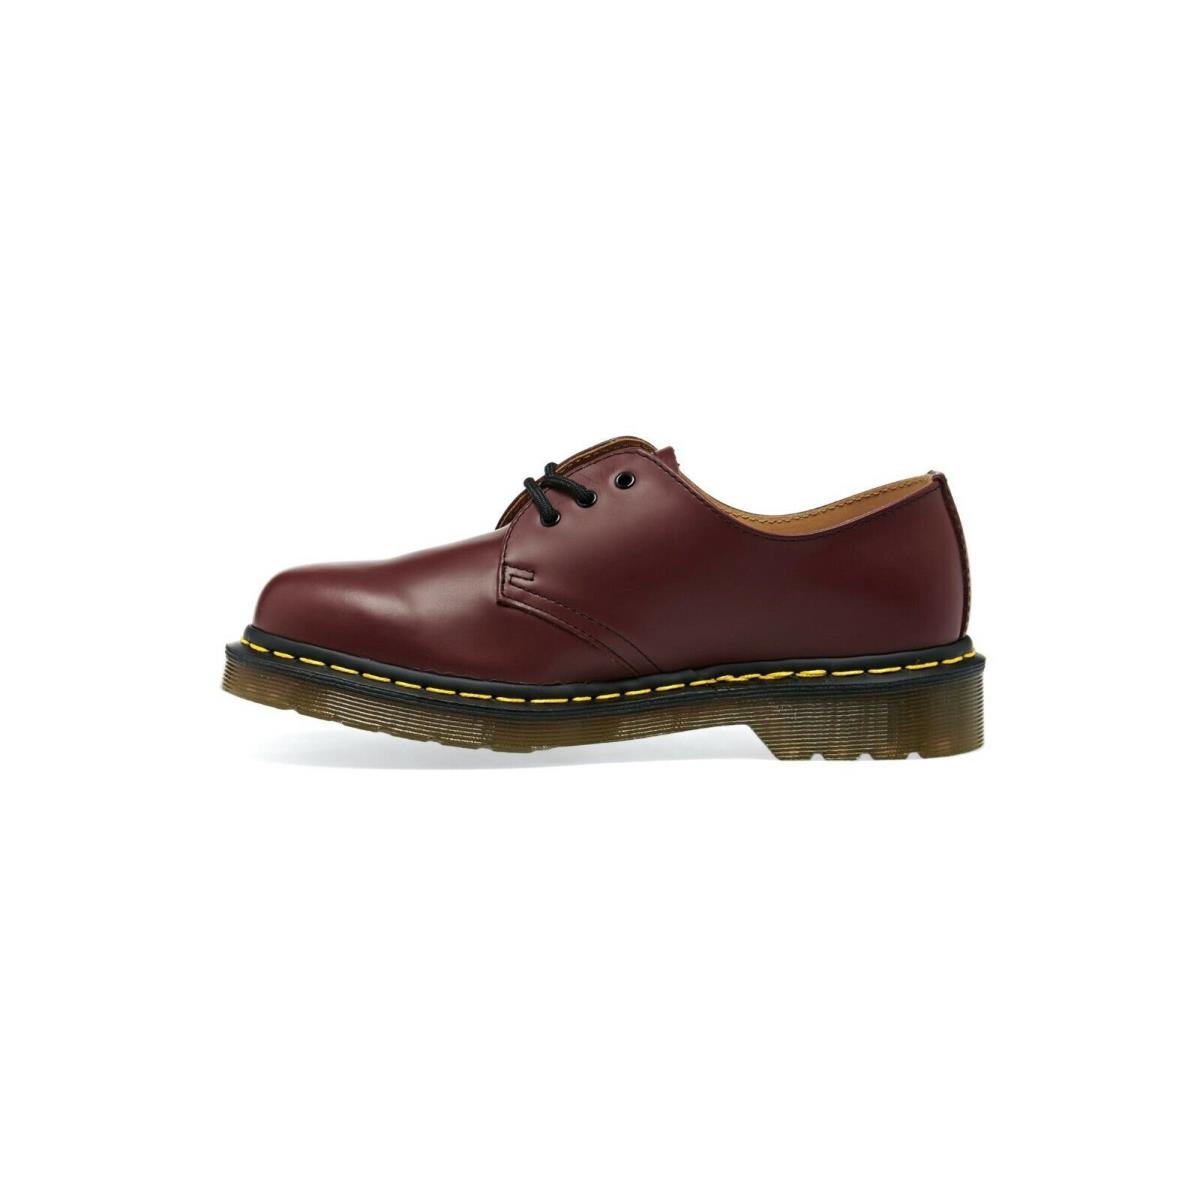 Dr Martens Classic 1461 Cherry Red Smooth Leather Men Women Platform Shoes - Red